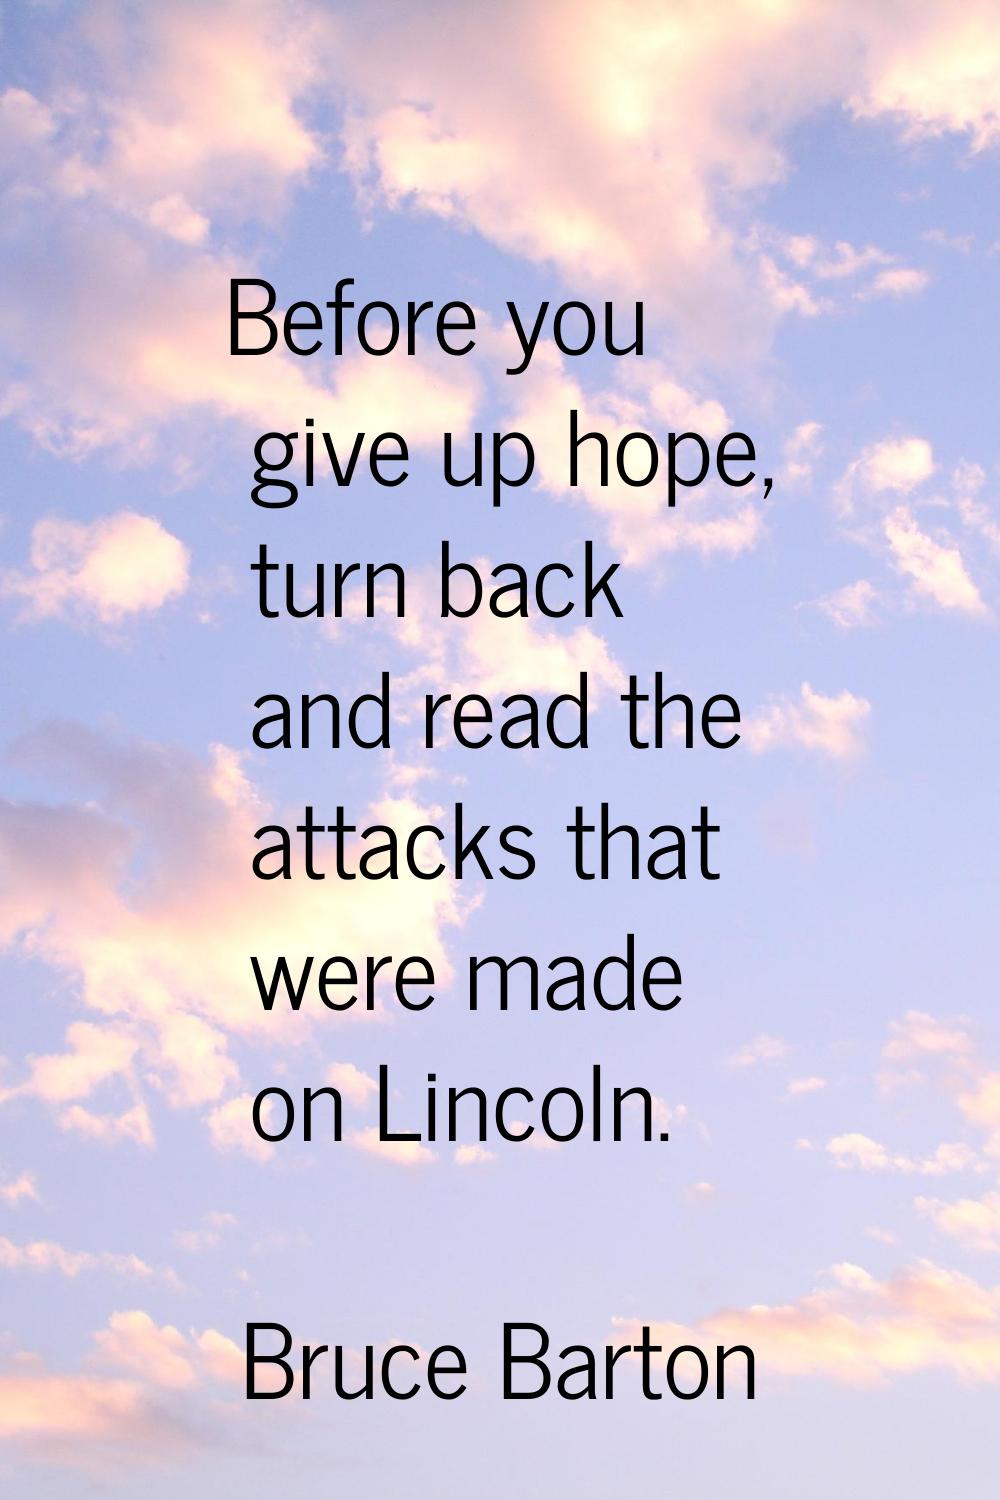 Before you give up hope, turn back and read the attacks that were made on Lincoln.